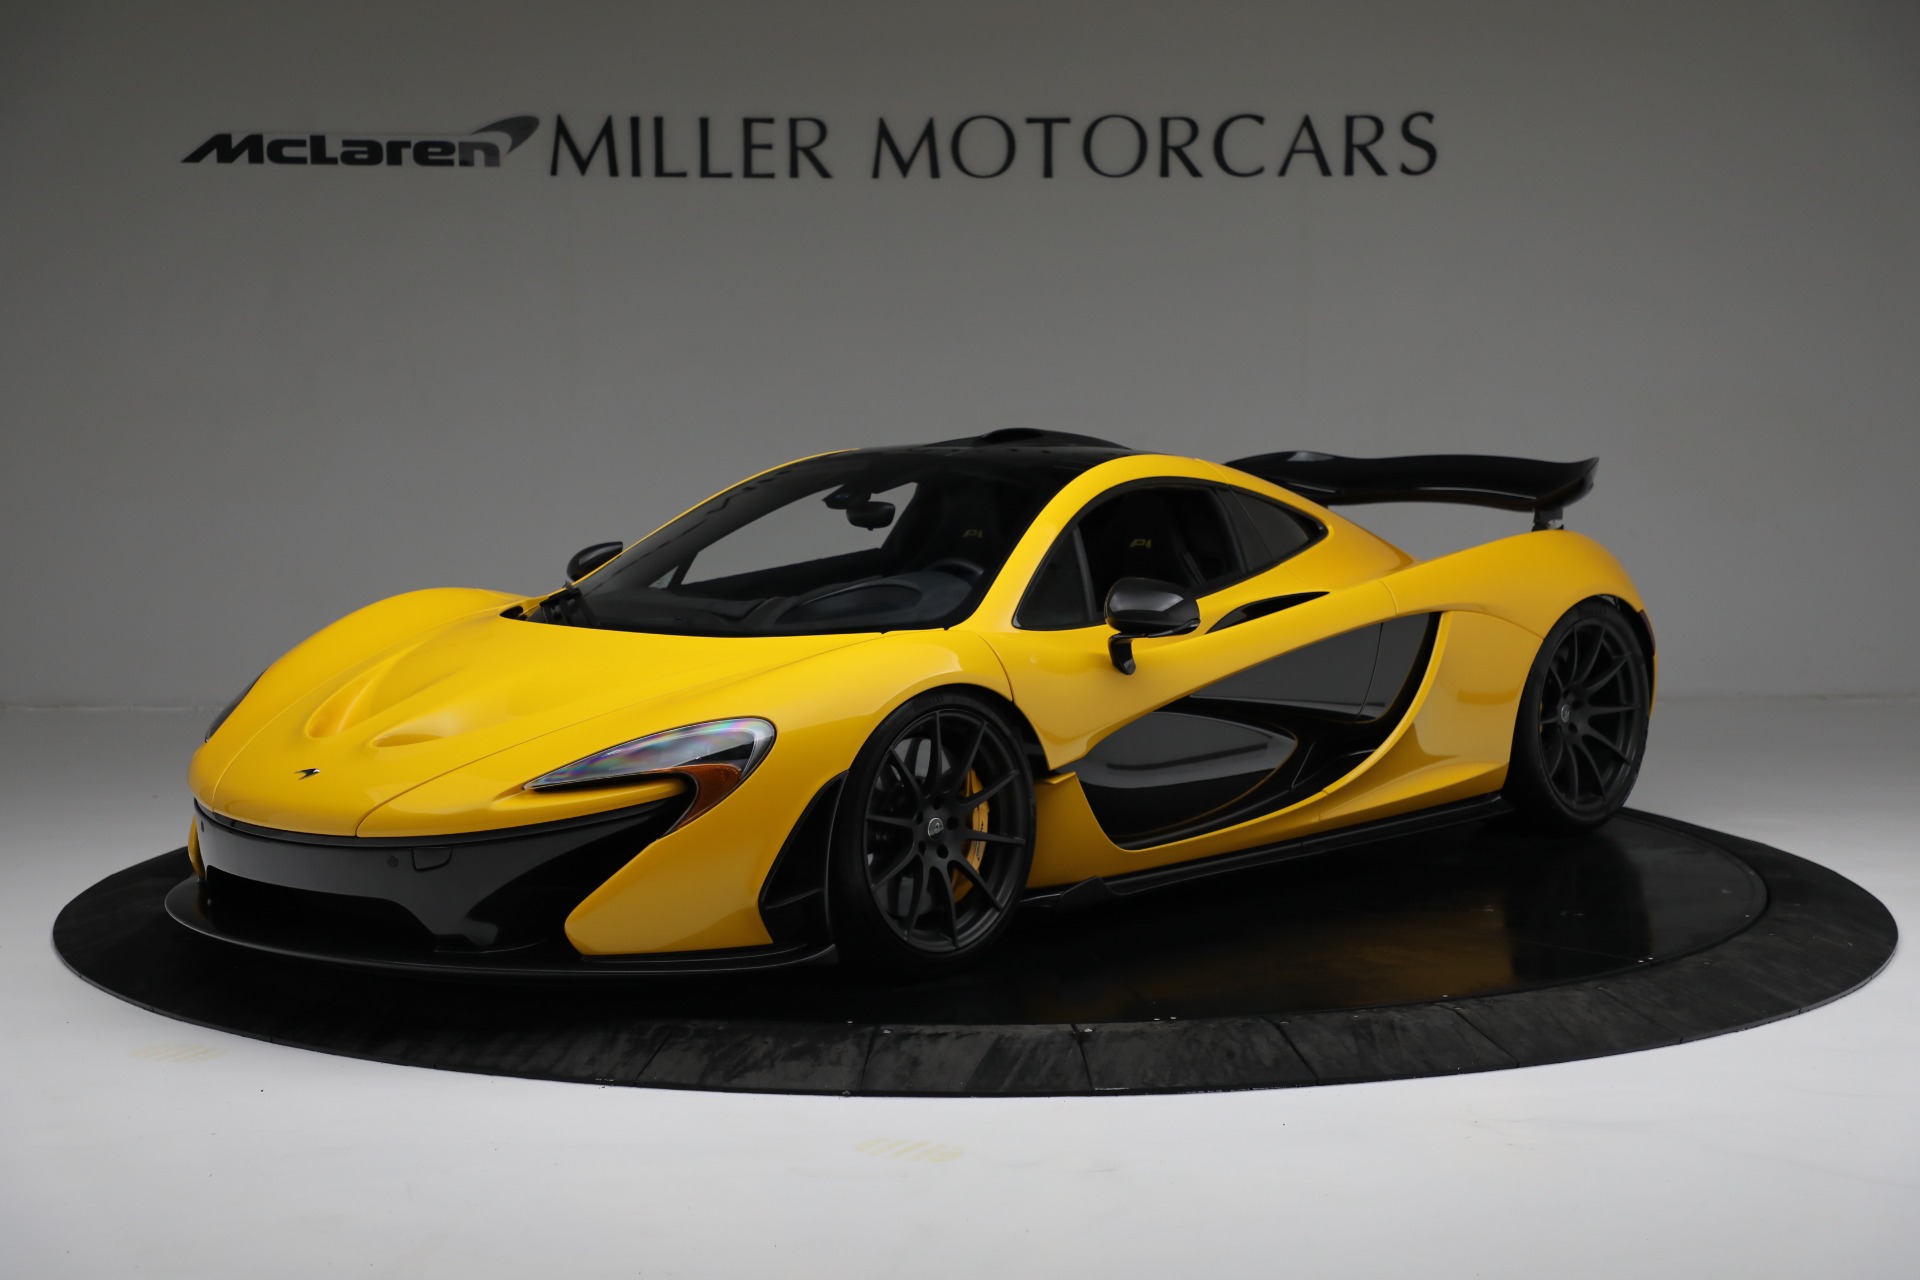 Used 2015 McLaren P1 for sale Sold at McLaren Greenwich in Greenwich CT 06830 1